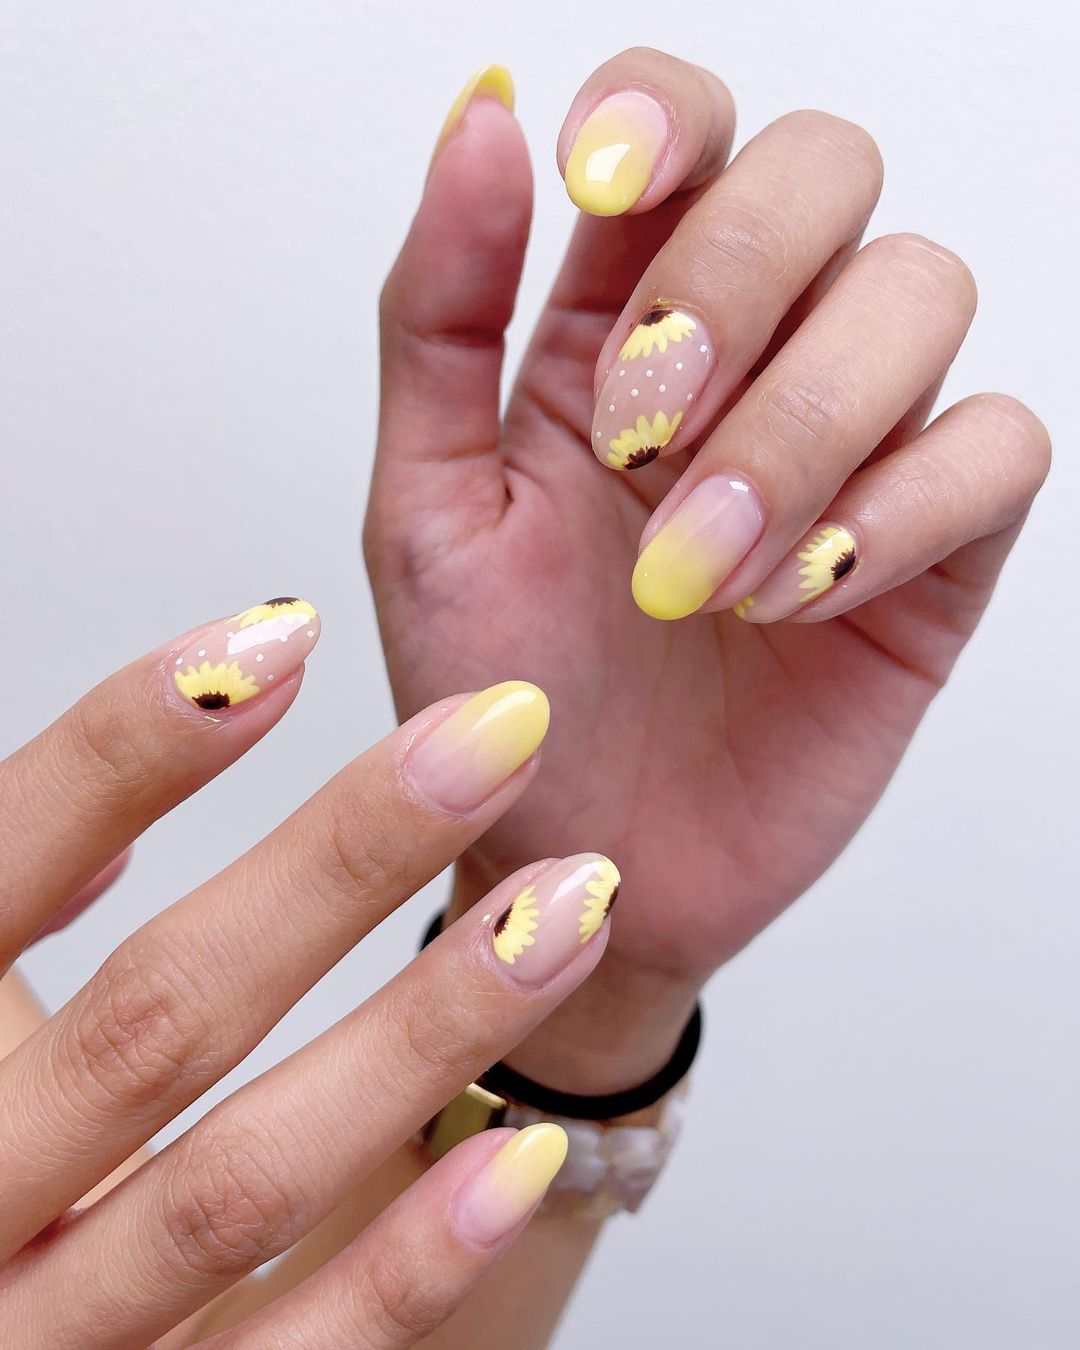 Short Ombre Nails with Sunflower